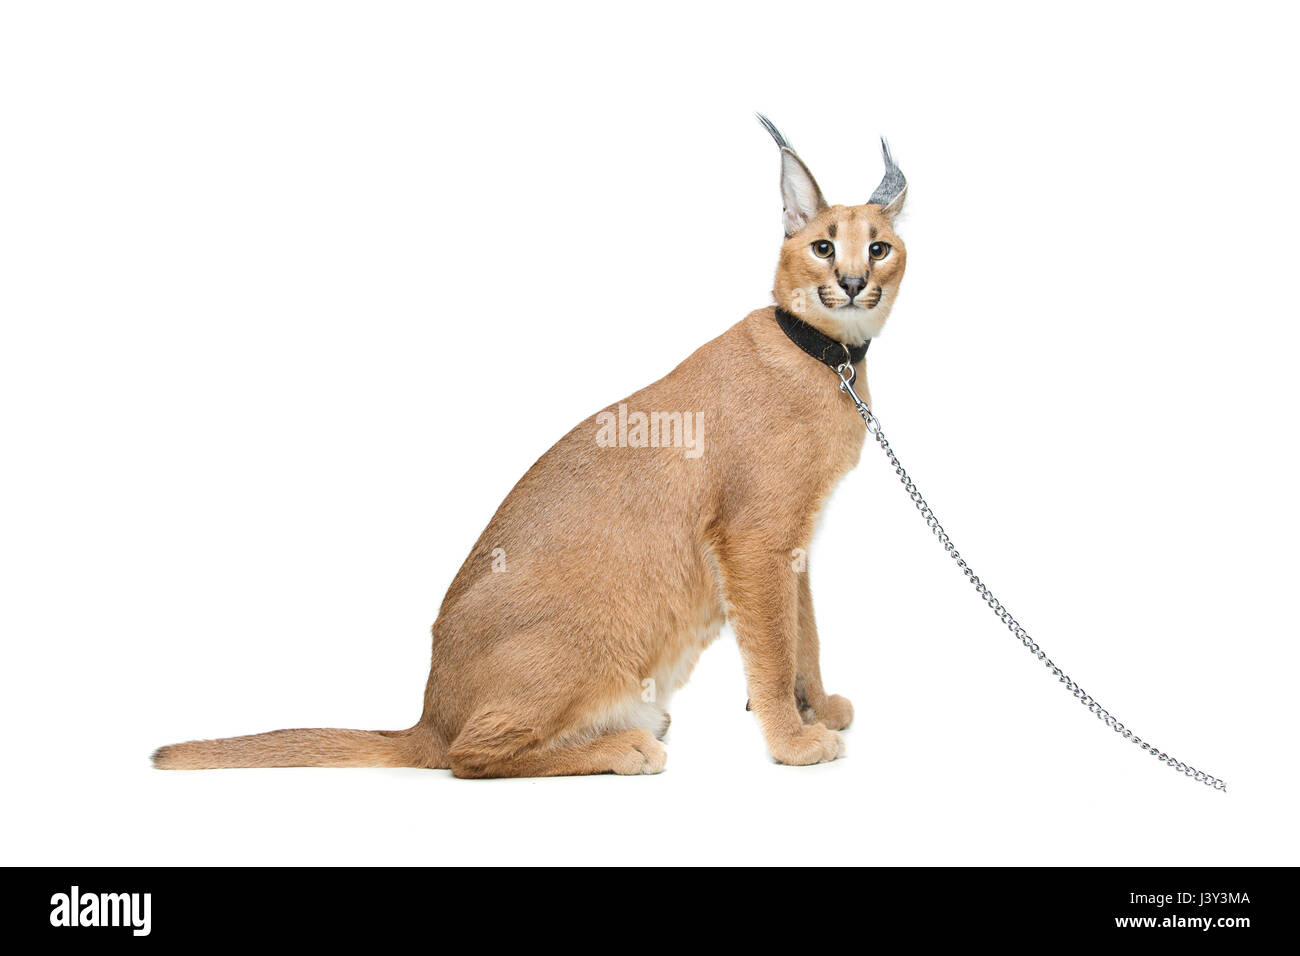 Beautiful caracal lynx 6 months old kitten in leather collar with chain leash sitting on white background. Isolated. Studio shot. Copy space. Stock Photo